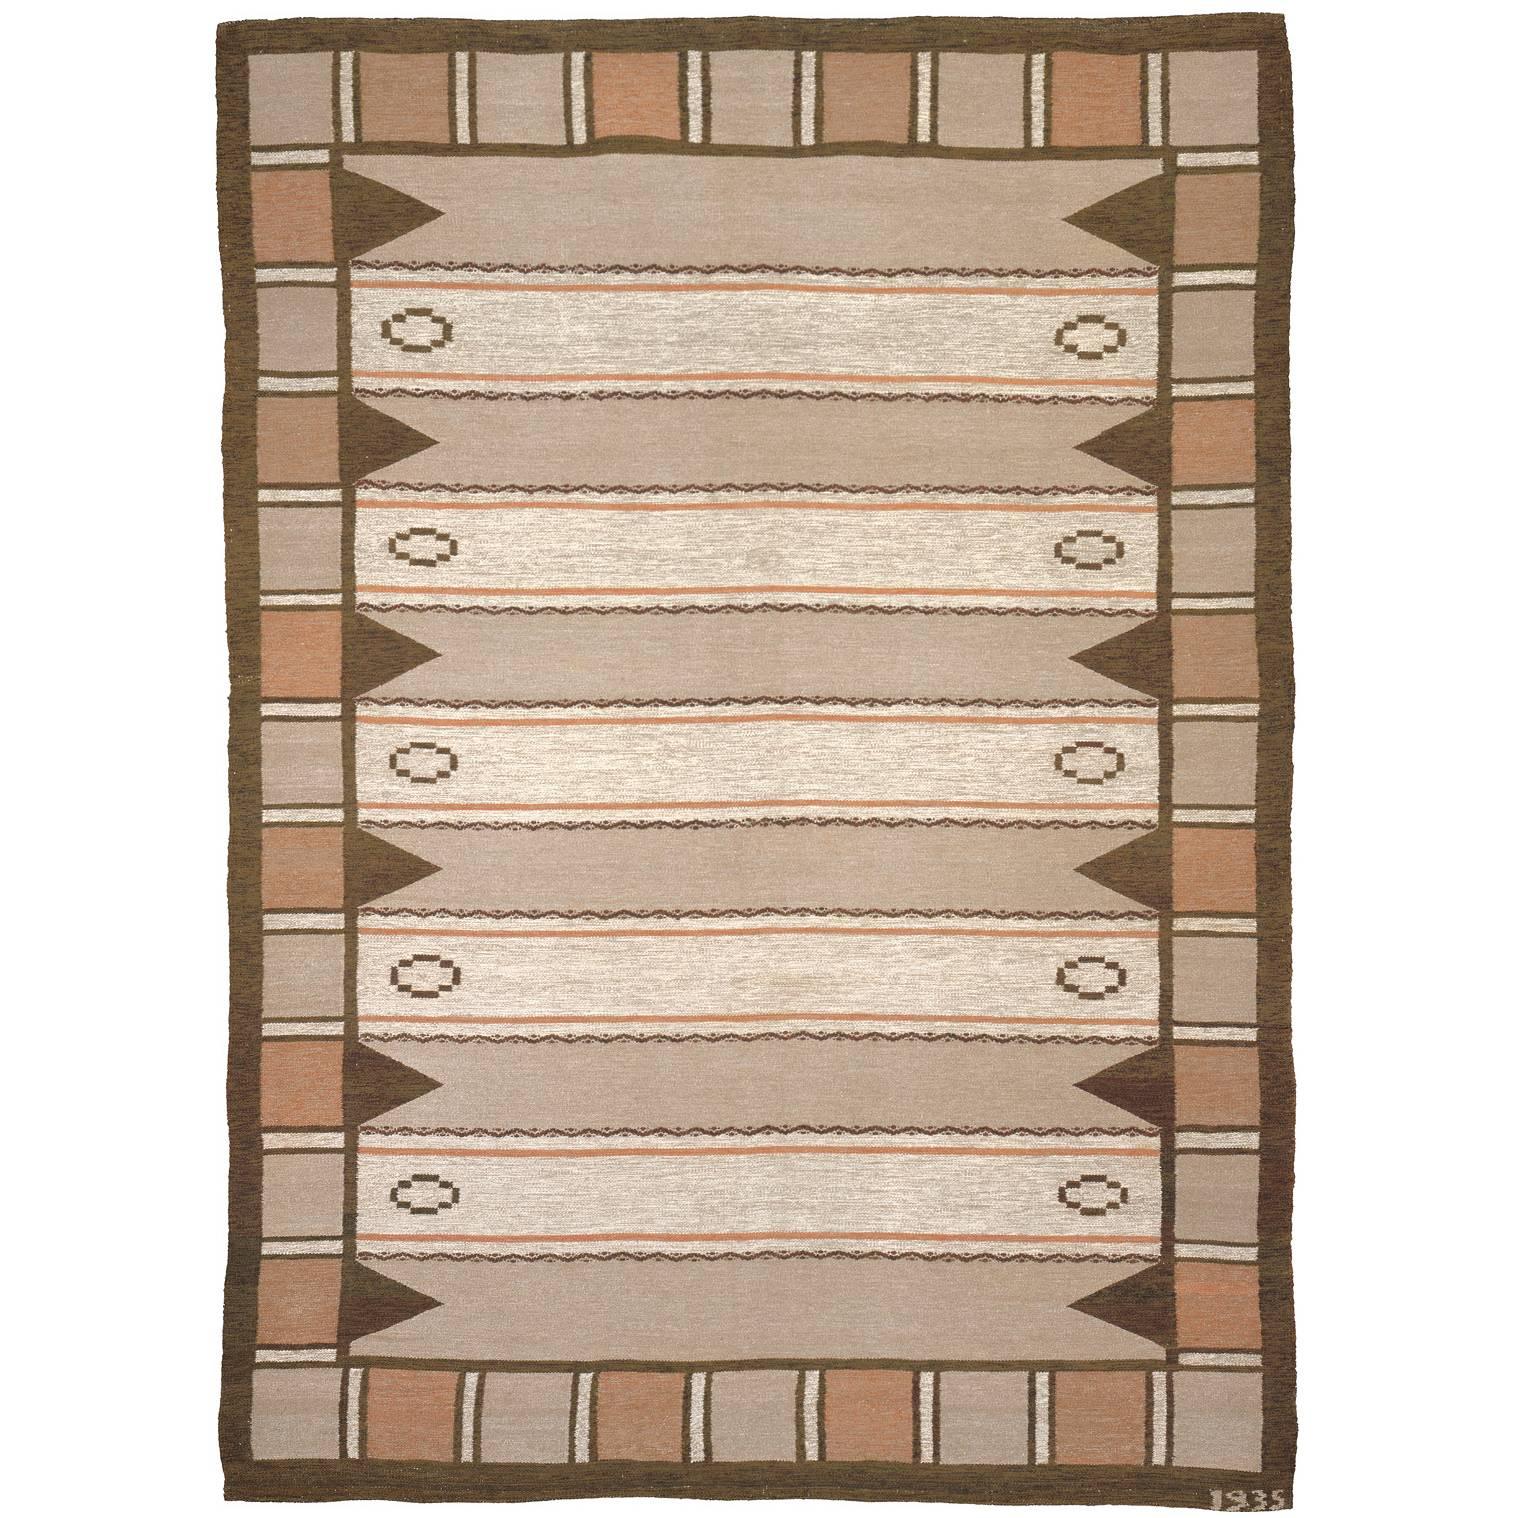 Early 20th Century Swedish Flat-Weave Carpet For Sale